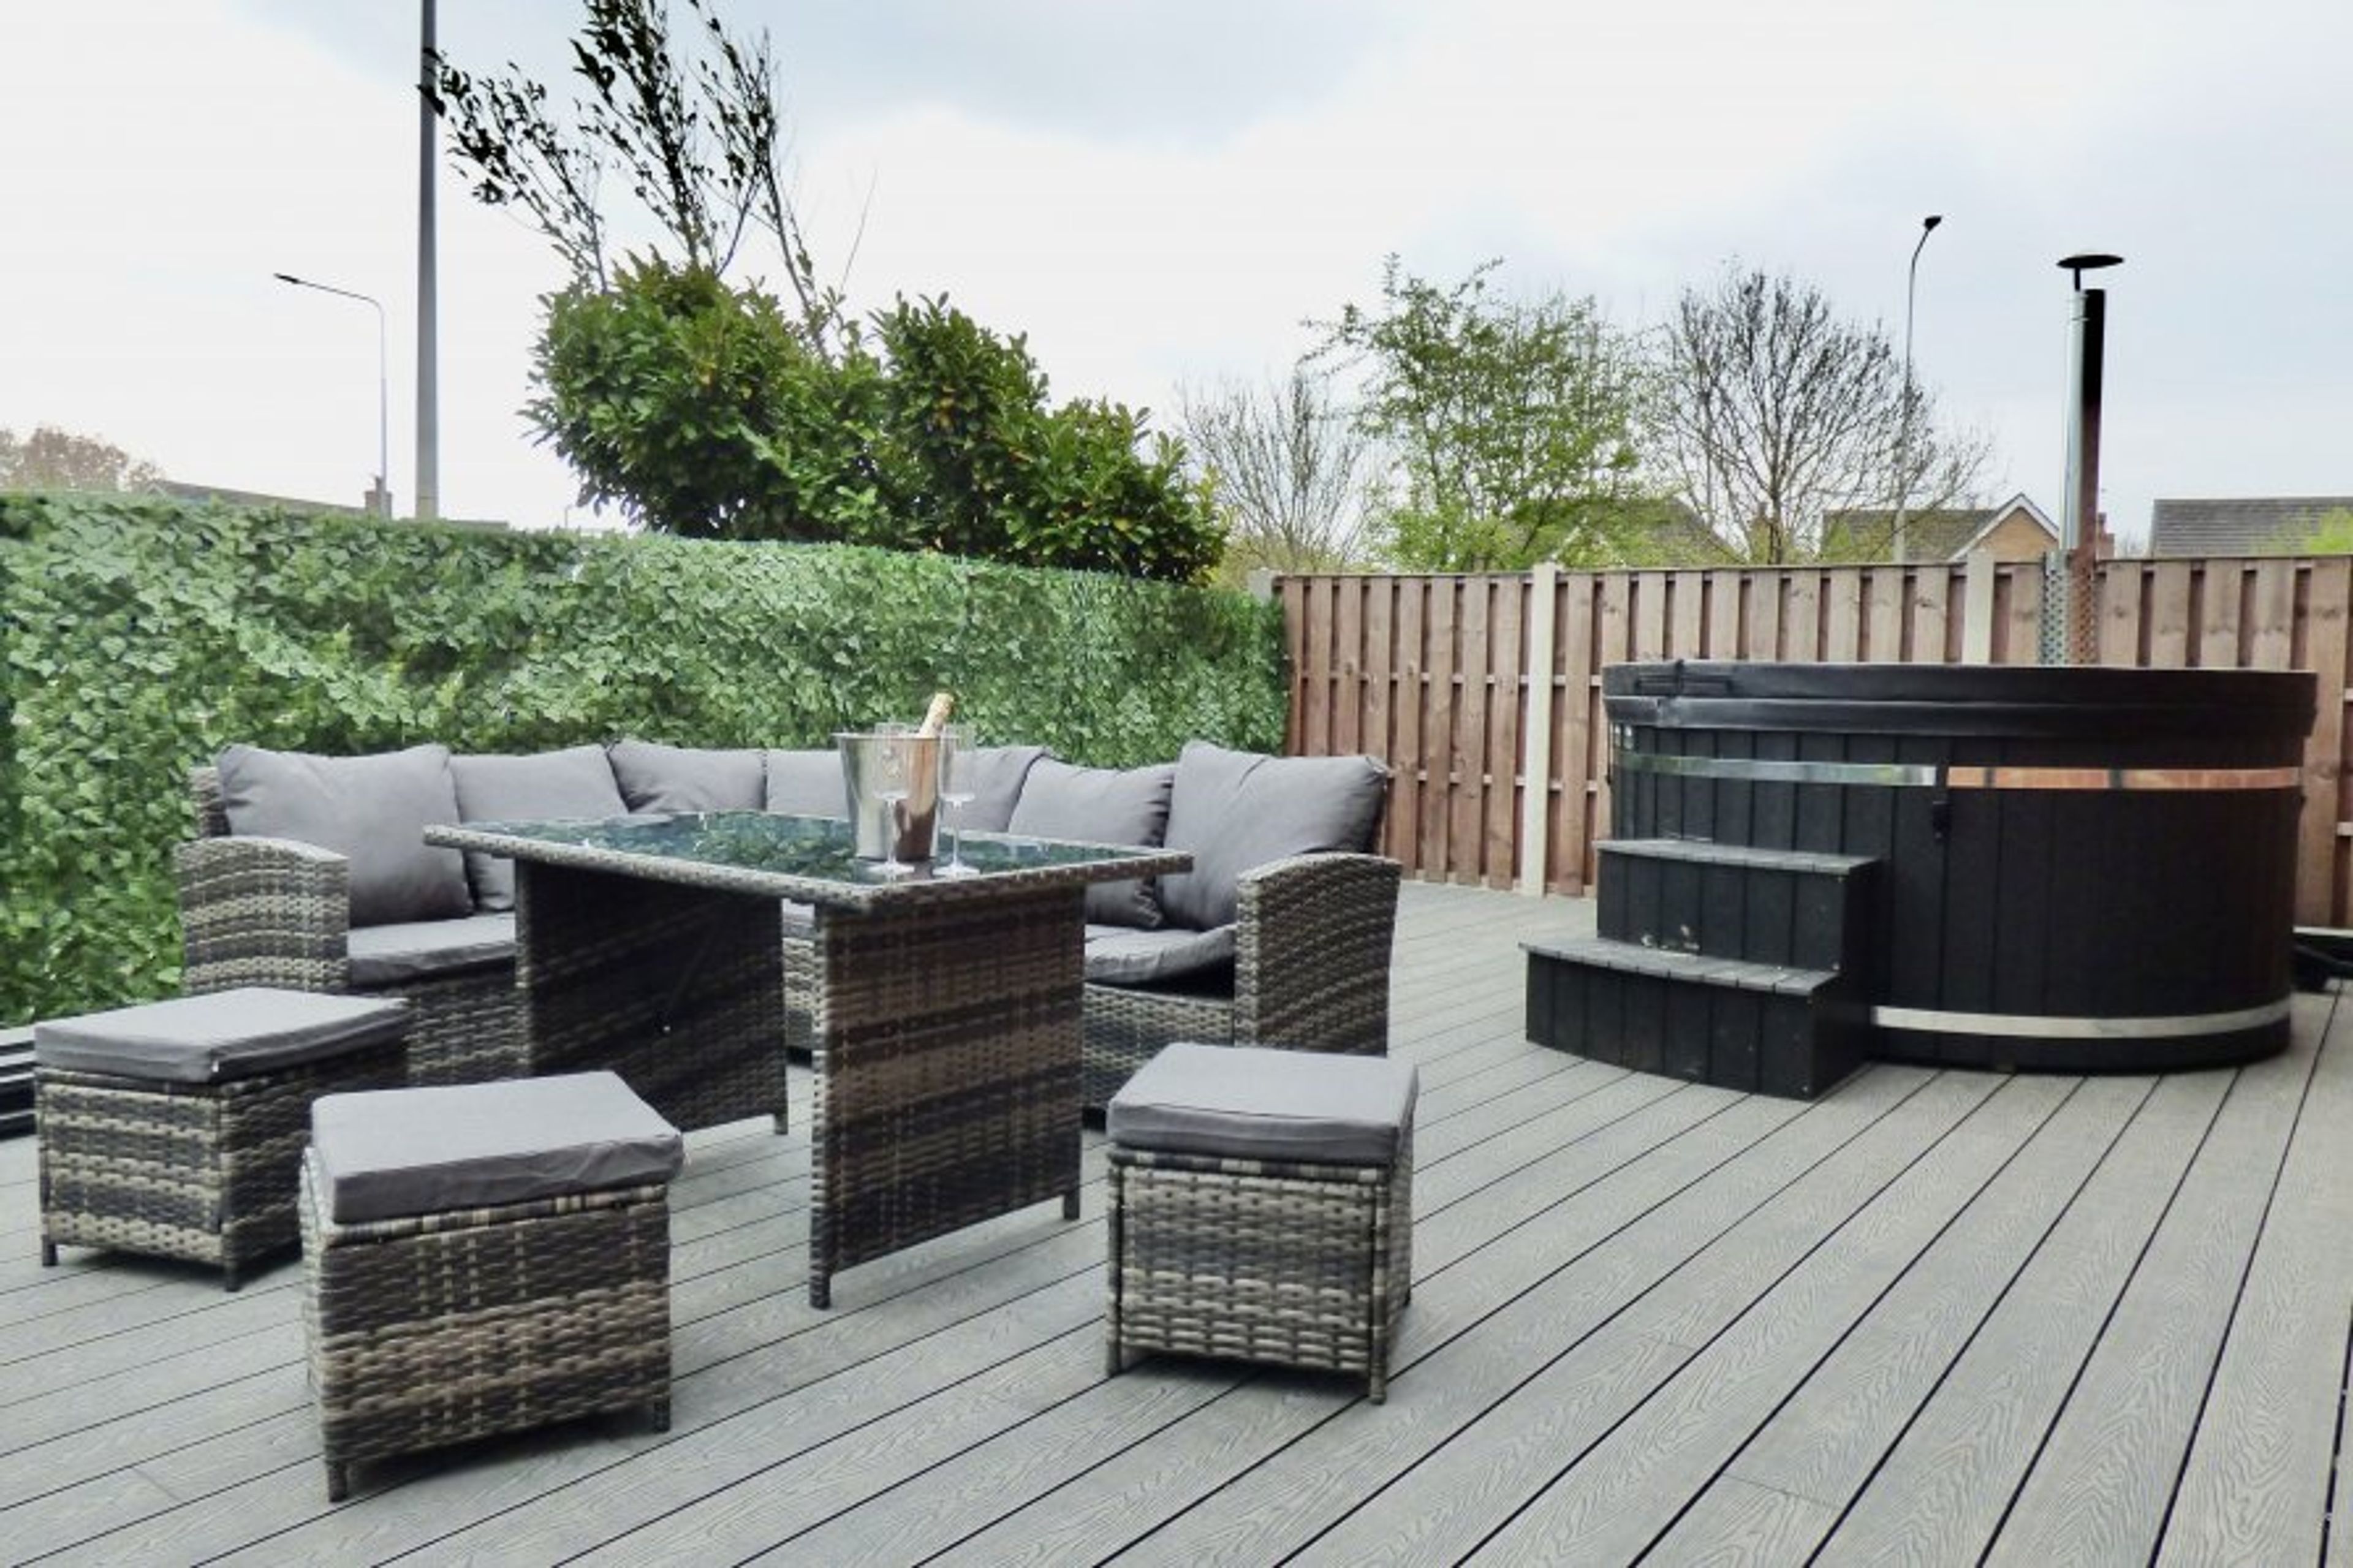 Outdoor seating area with woodfired hot tub